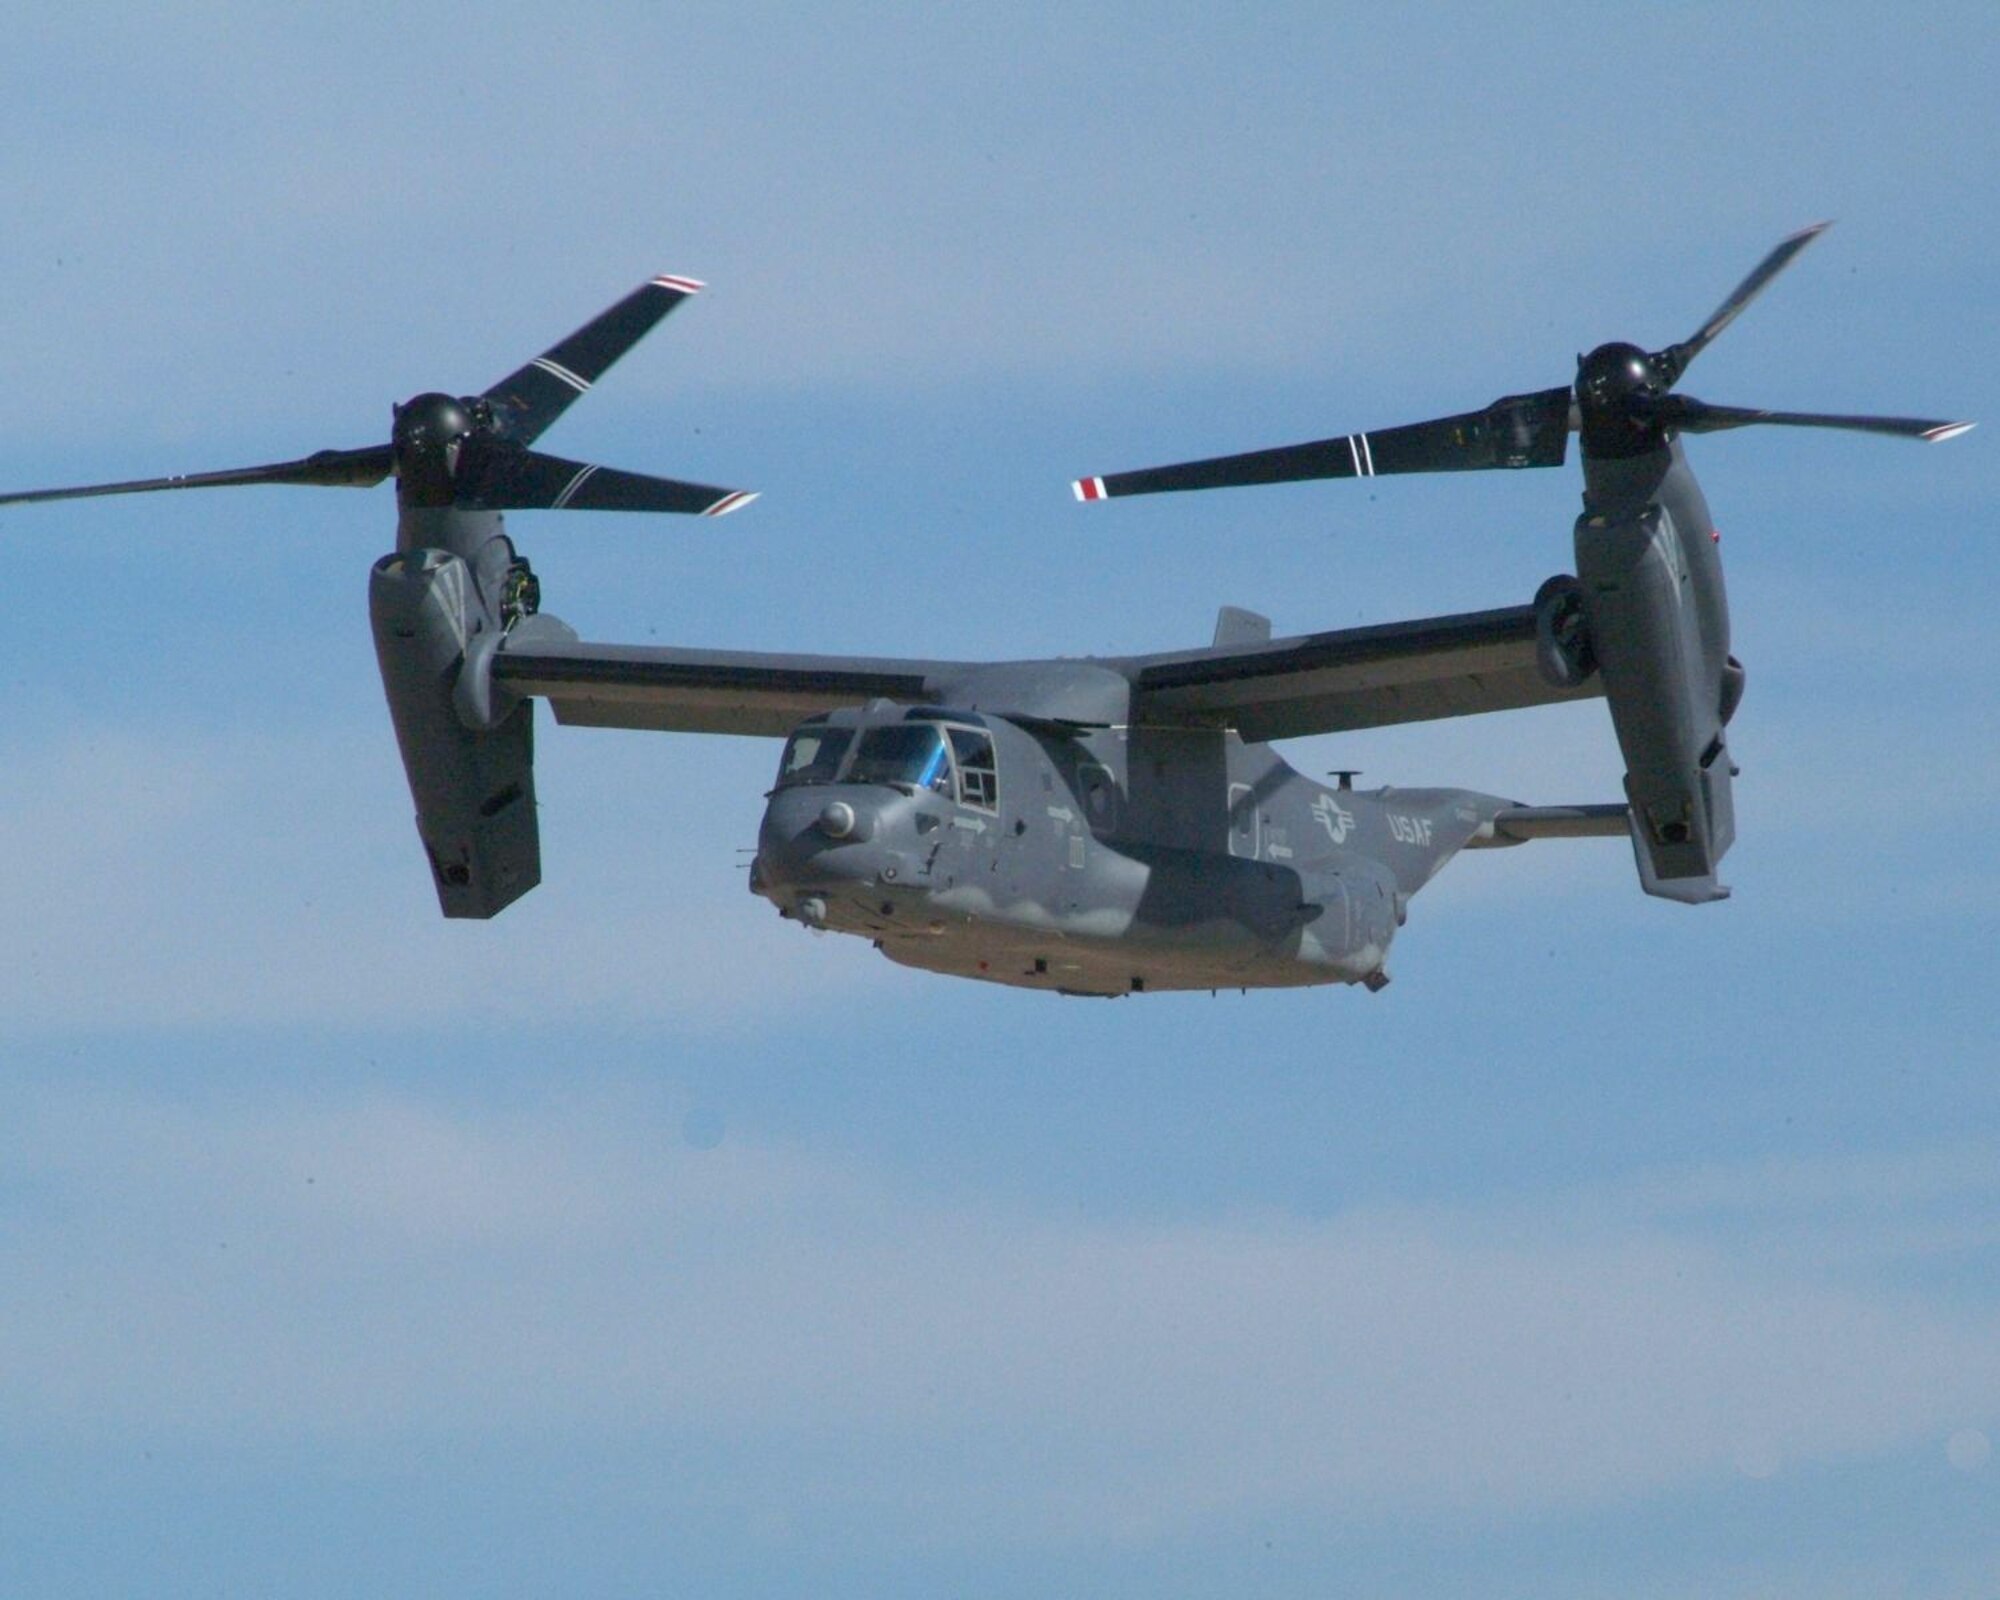 AMARILLO, Texas  - The first Block B/10 CV-22 converts between airplane and helicopter modes during a flight at the Bell Helicopter facility in Amarillo, Texas. (Photo courtesy of Bell Helicopter)

